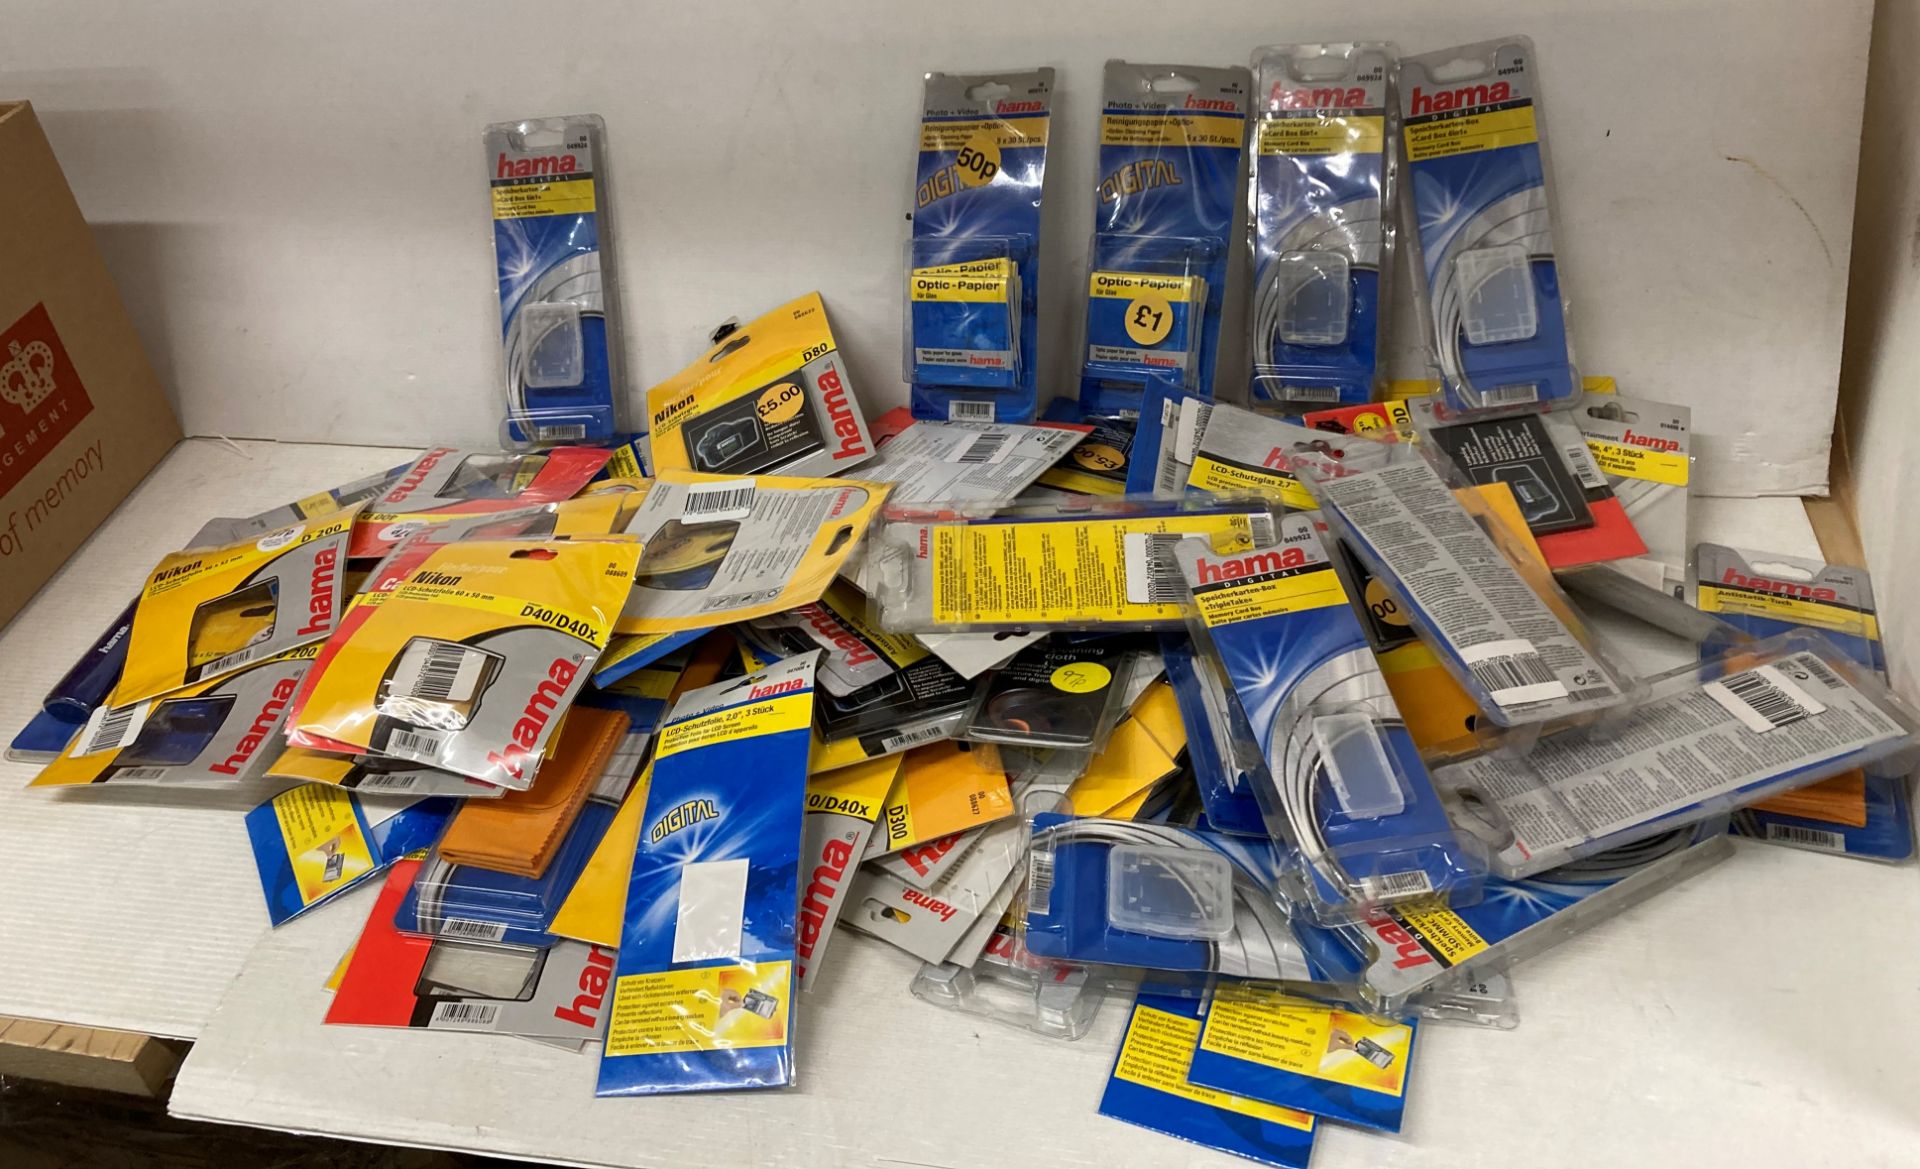 Large quantity of camera screen protectors, Optic paper, SD Card holders by Hama and Nikon,